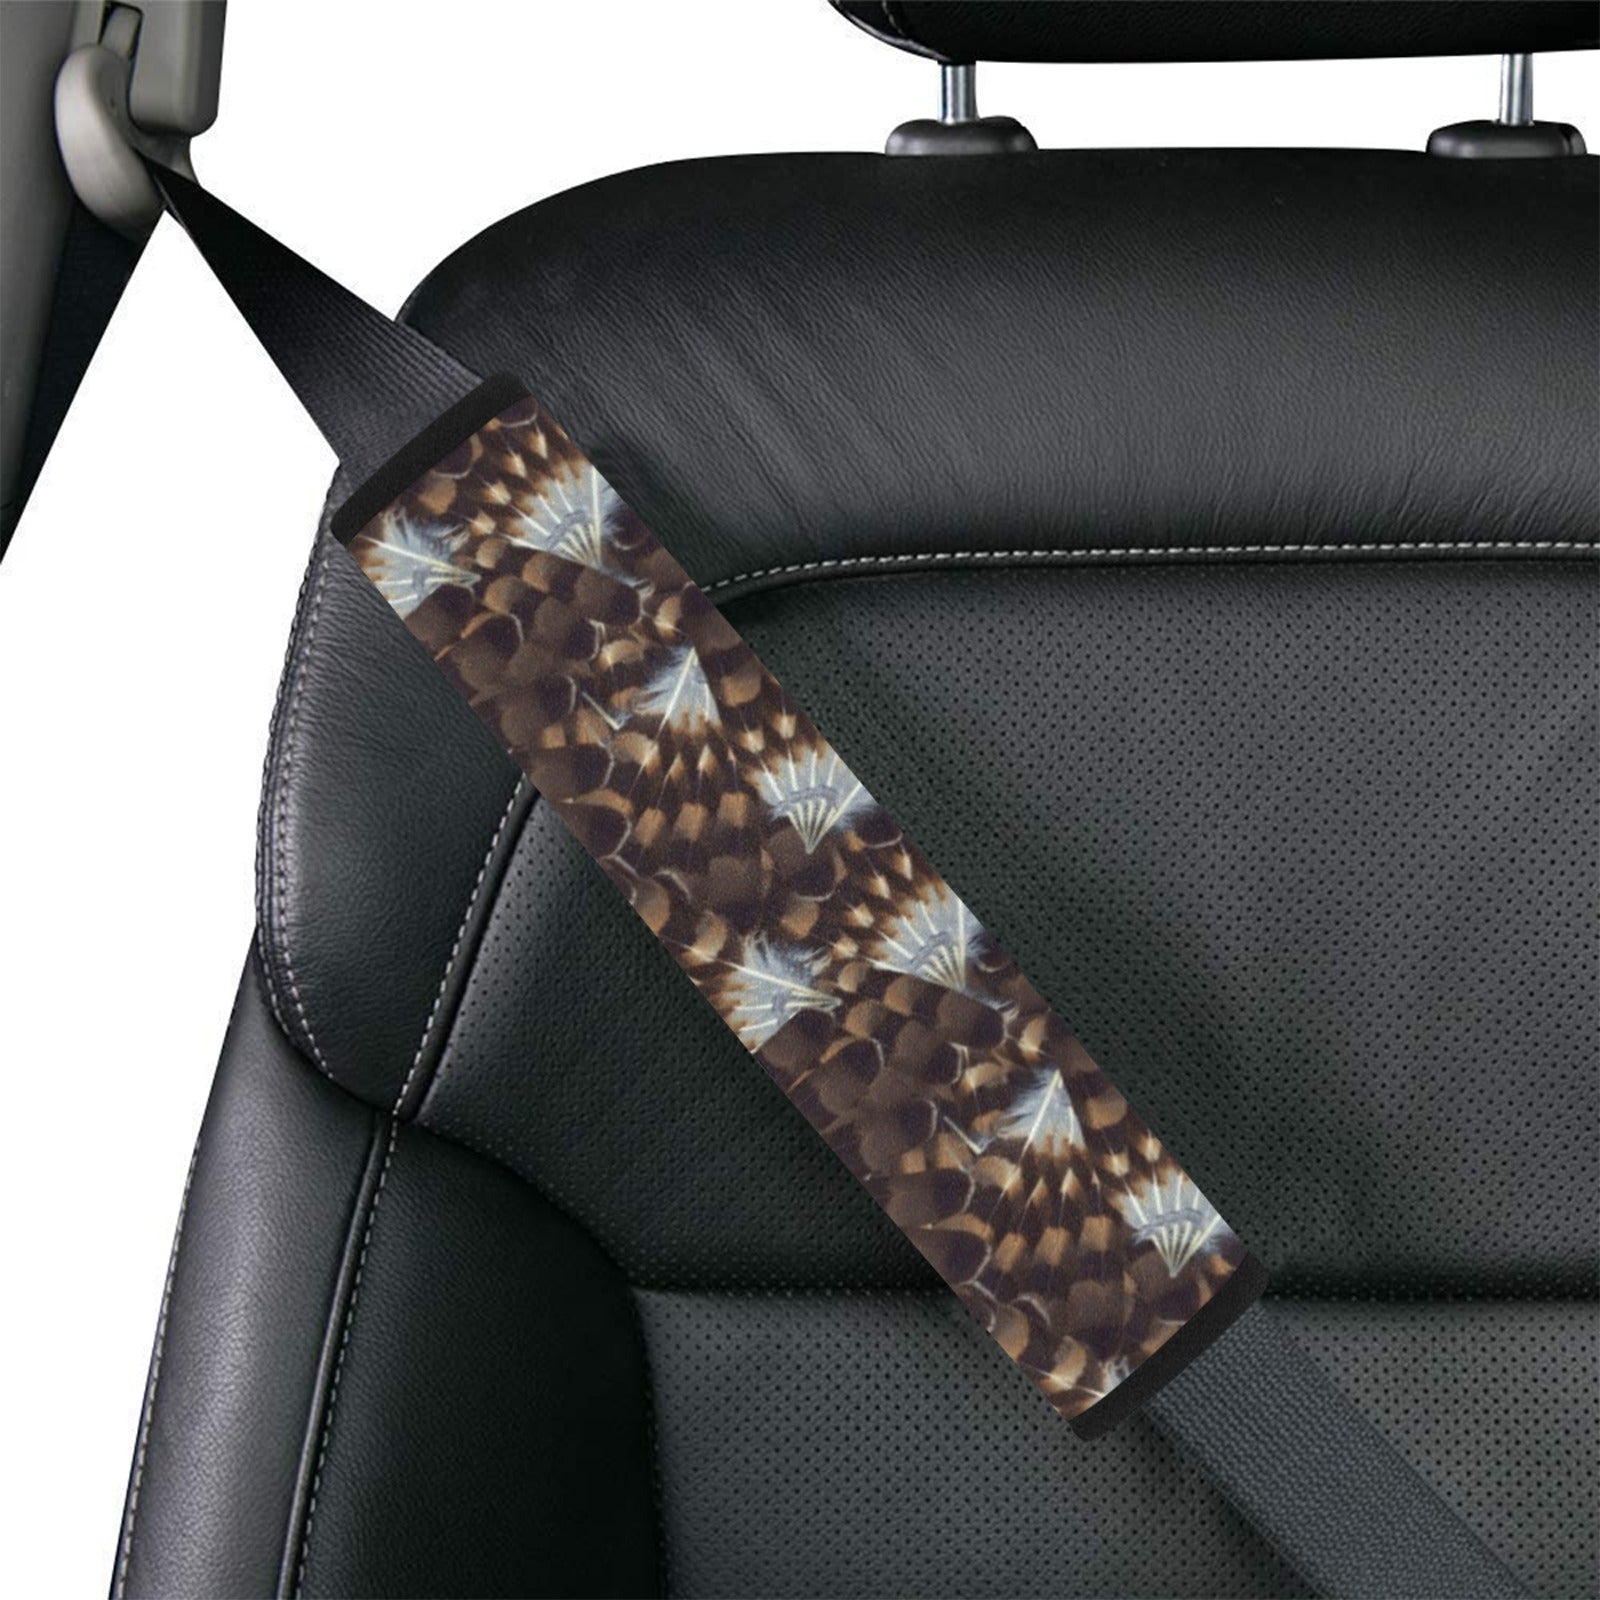 Hawk Feathers Car Seat Belt Cover 7''x12.6'' (Pack of 2)